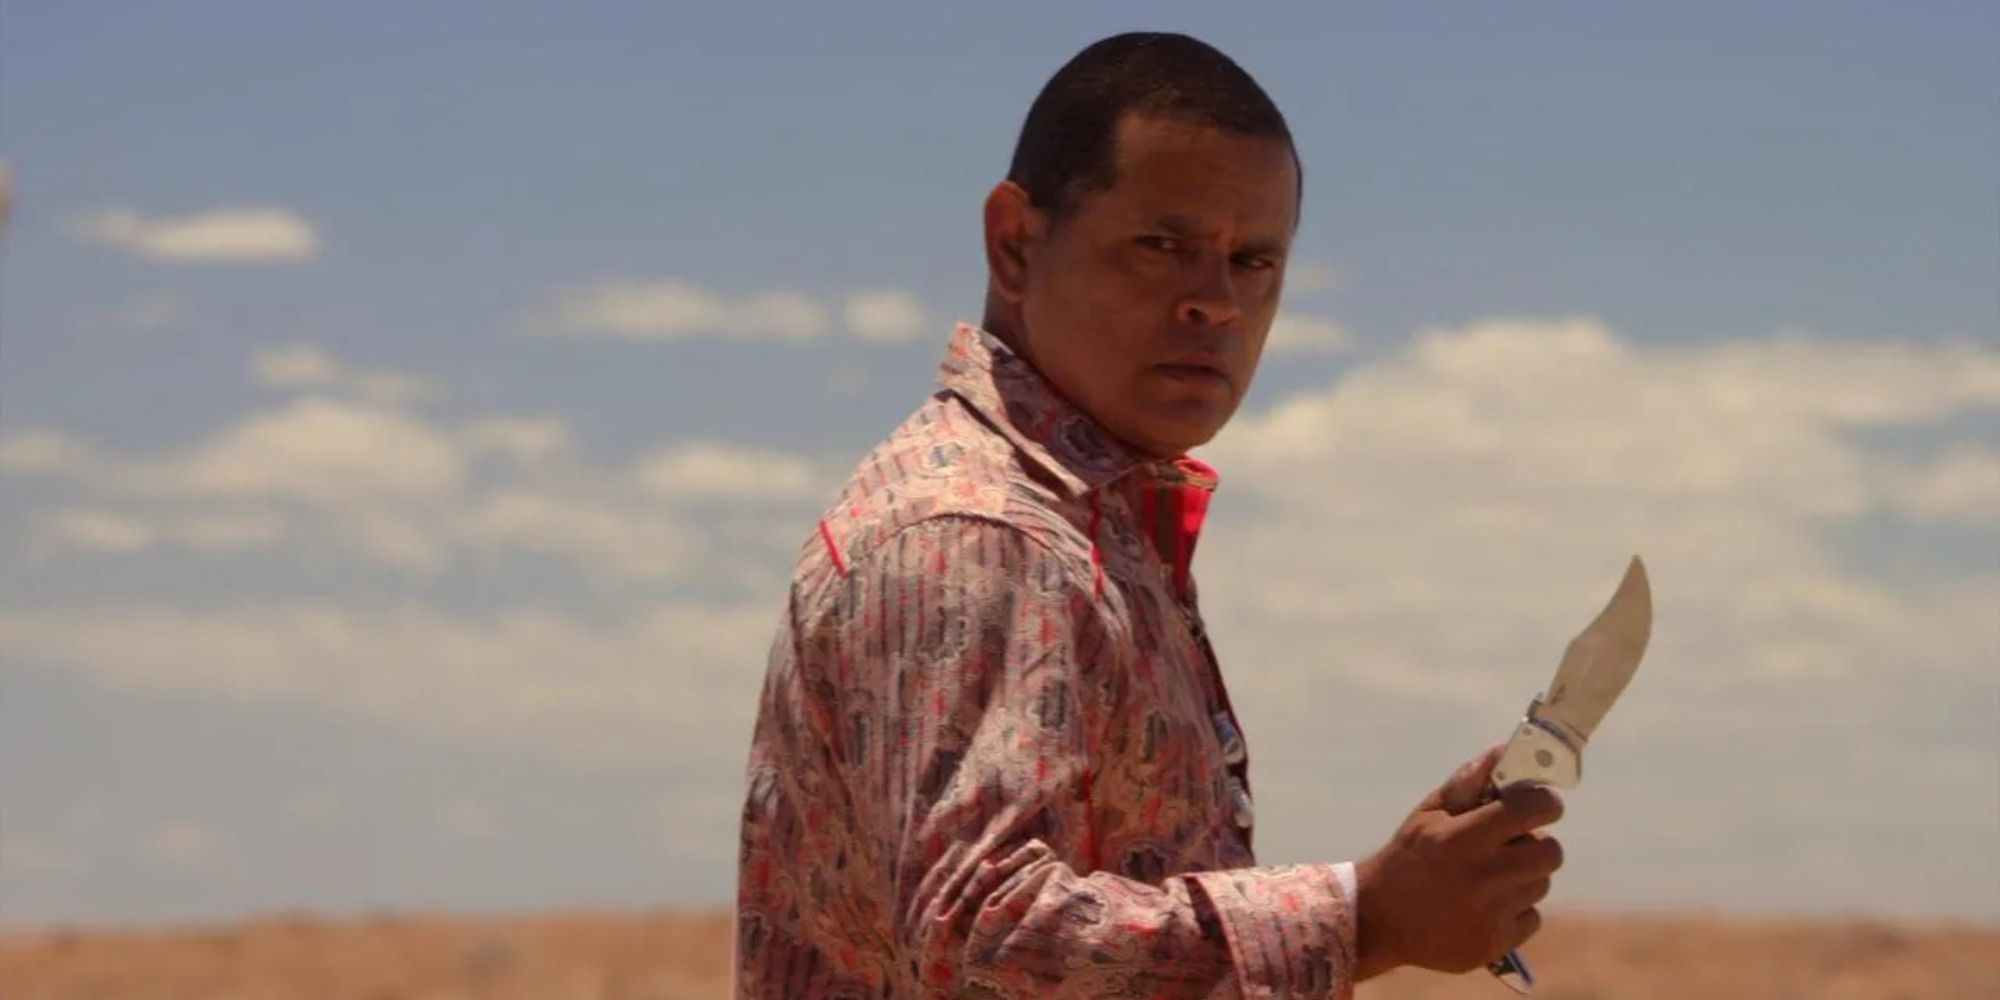 Tuco Salamanca holding a knife in the desert in Better Call Saul